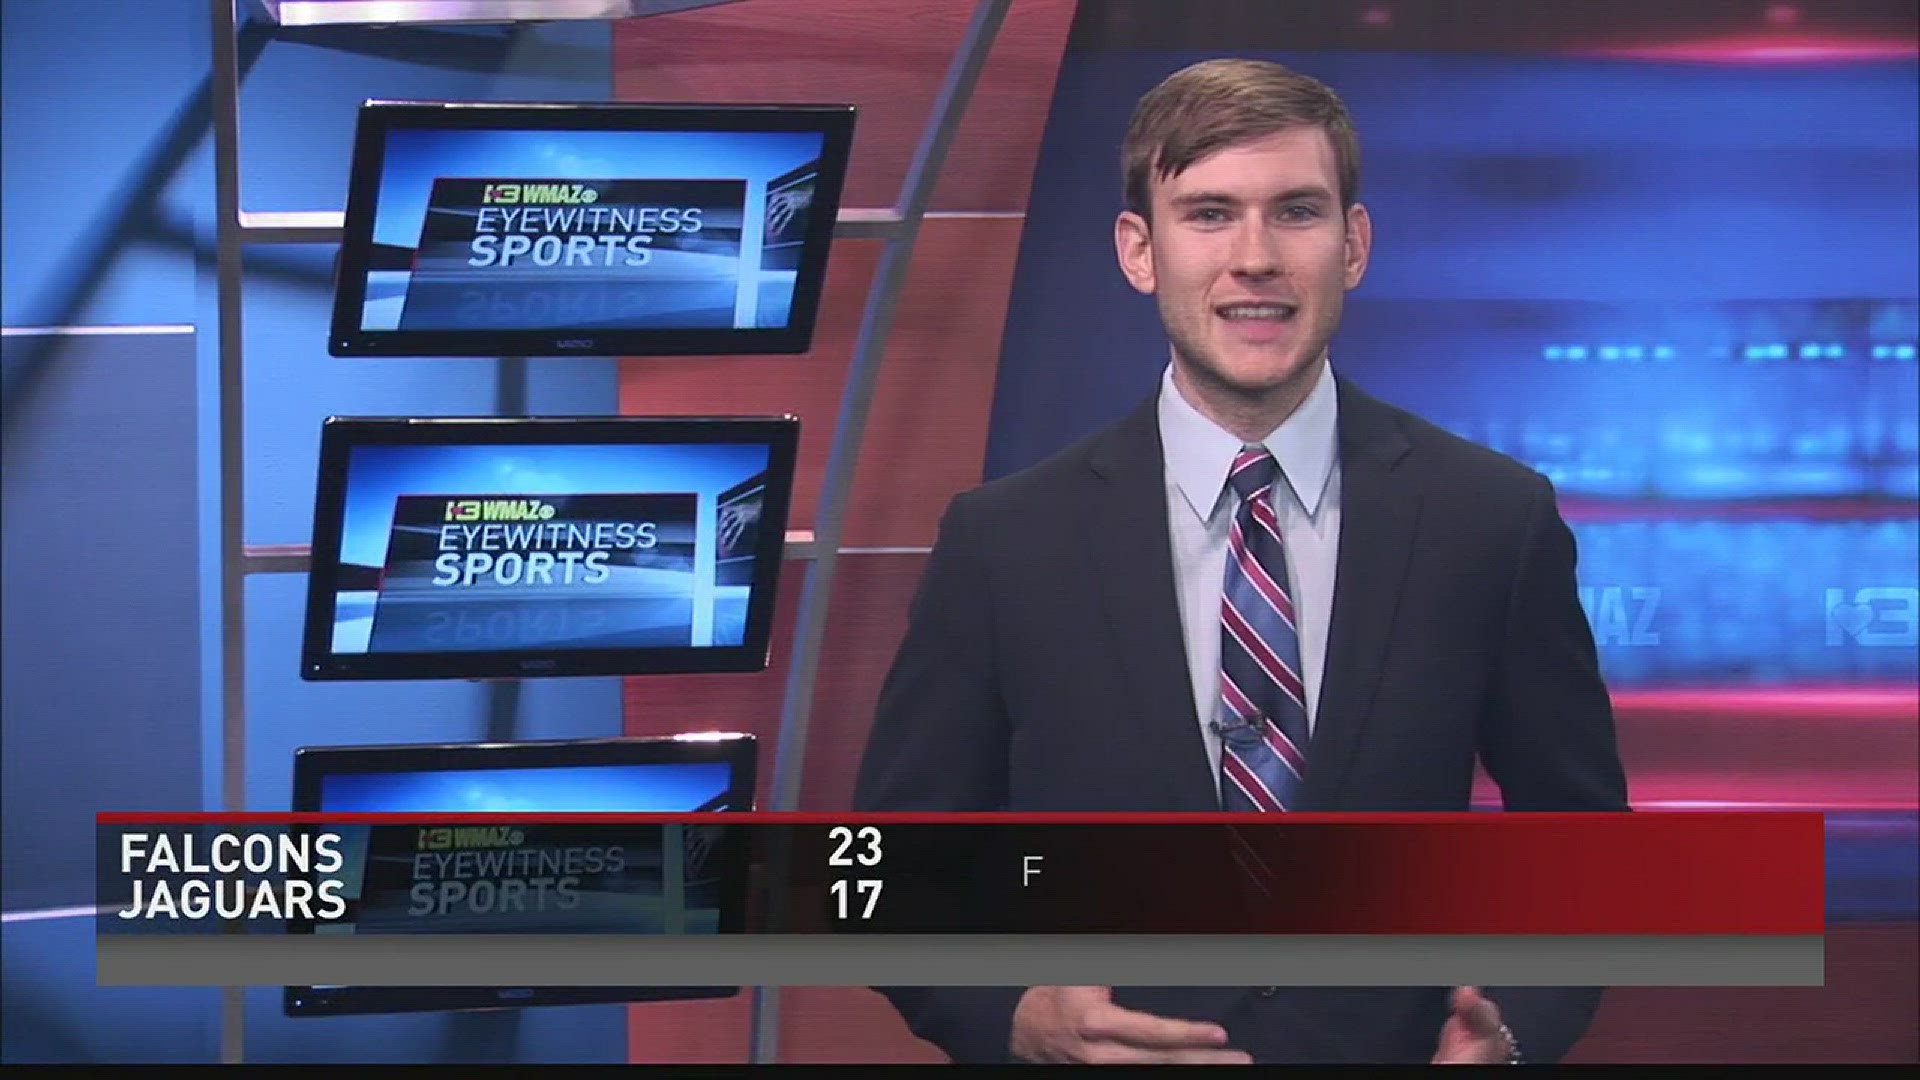 Falcons best Jags, inspires multiple Stars Wars references from sports anchor.